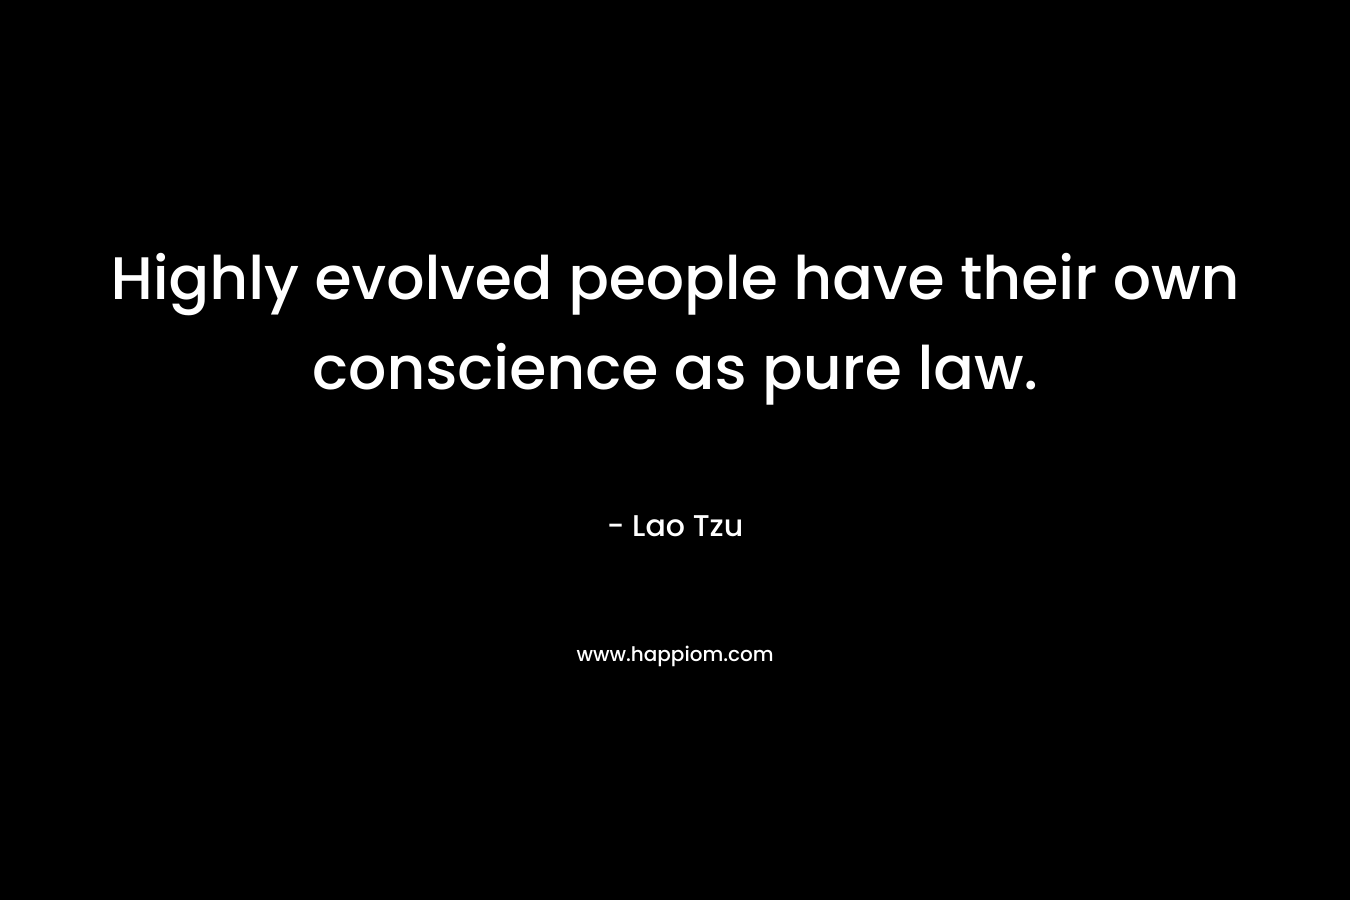 Highly evolved people have their own conscience as pure law.